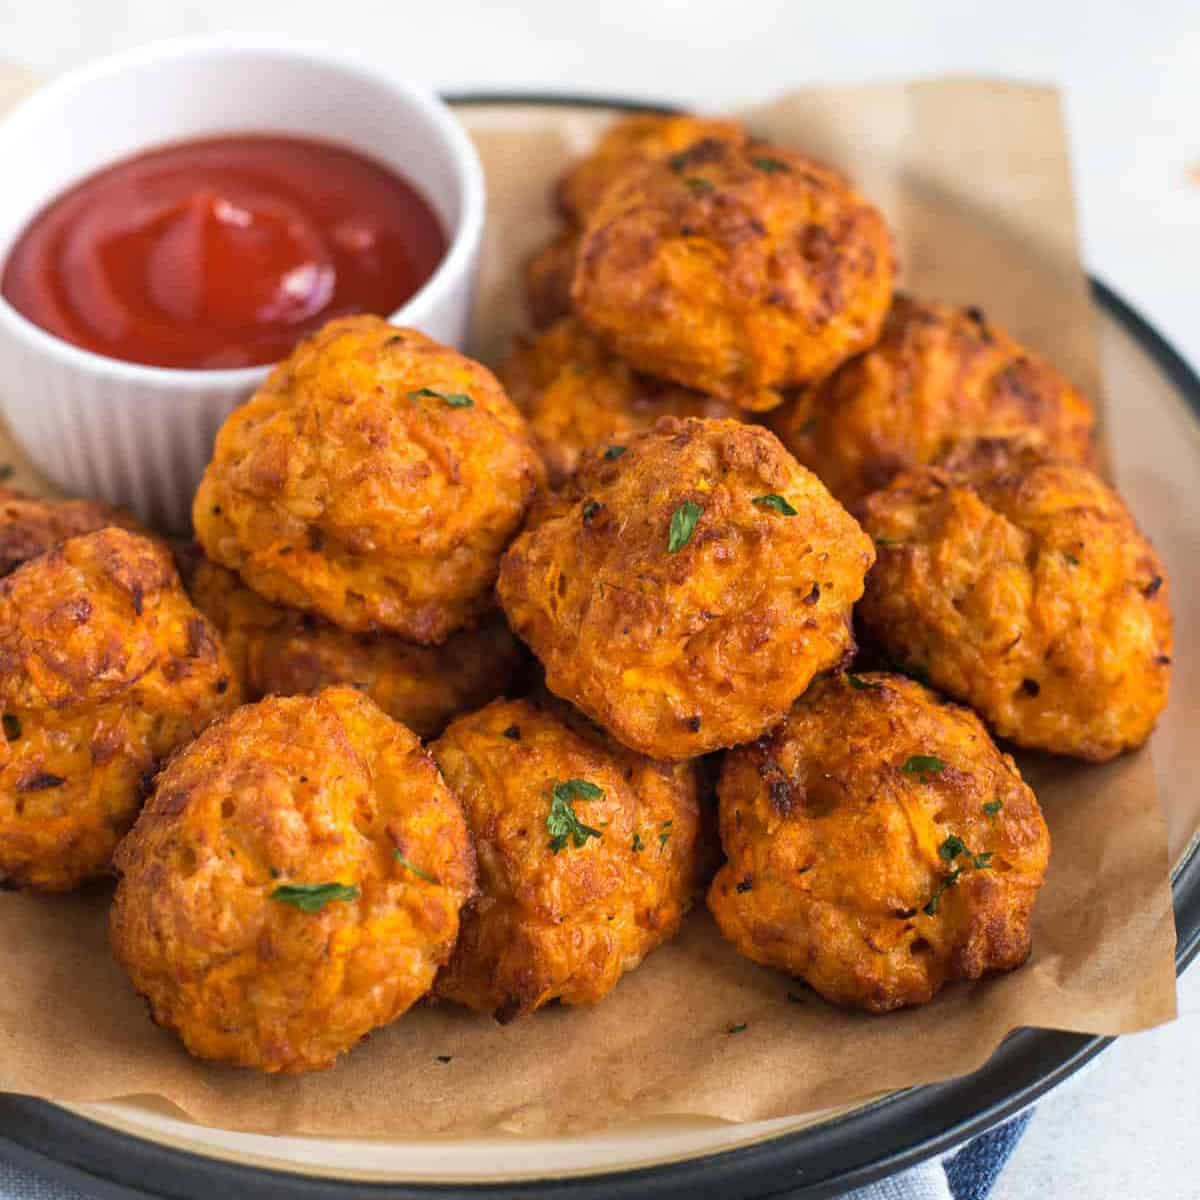 A stack of cheesy carrot bites on a plate with a ramekin of ketchup.